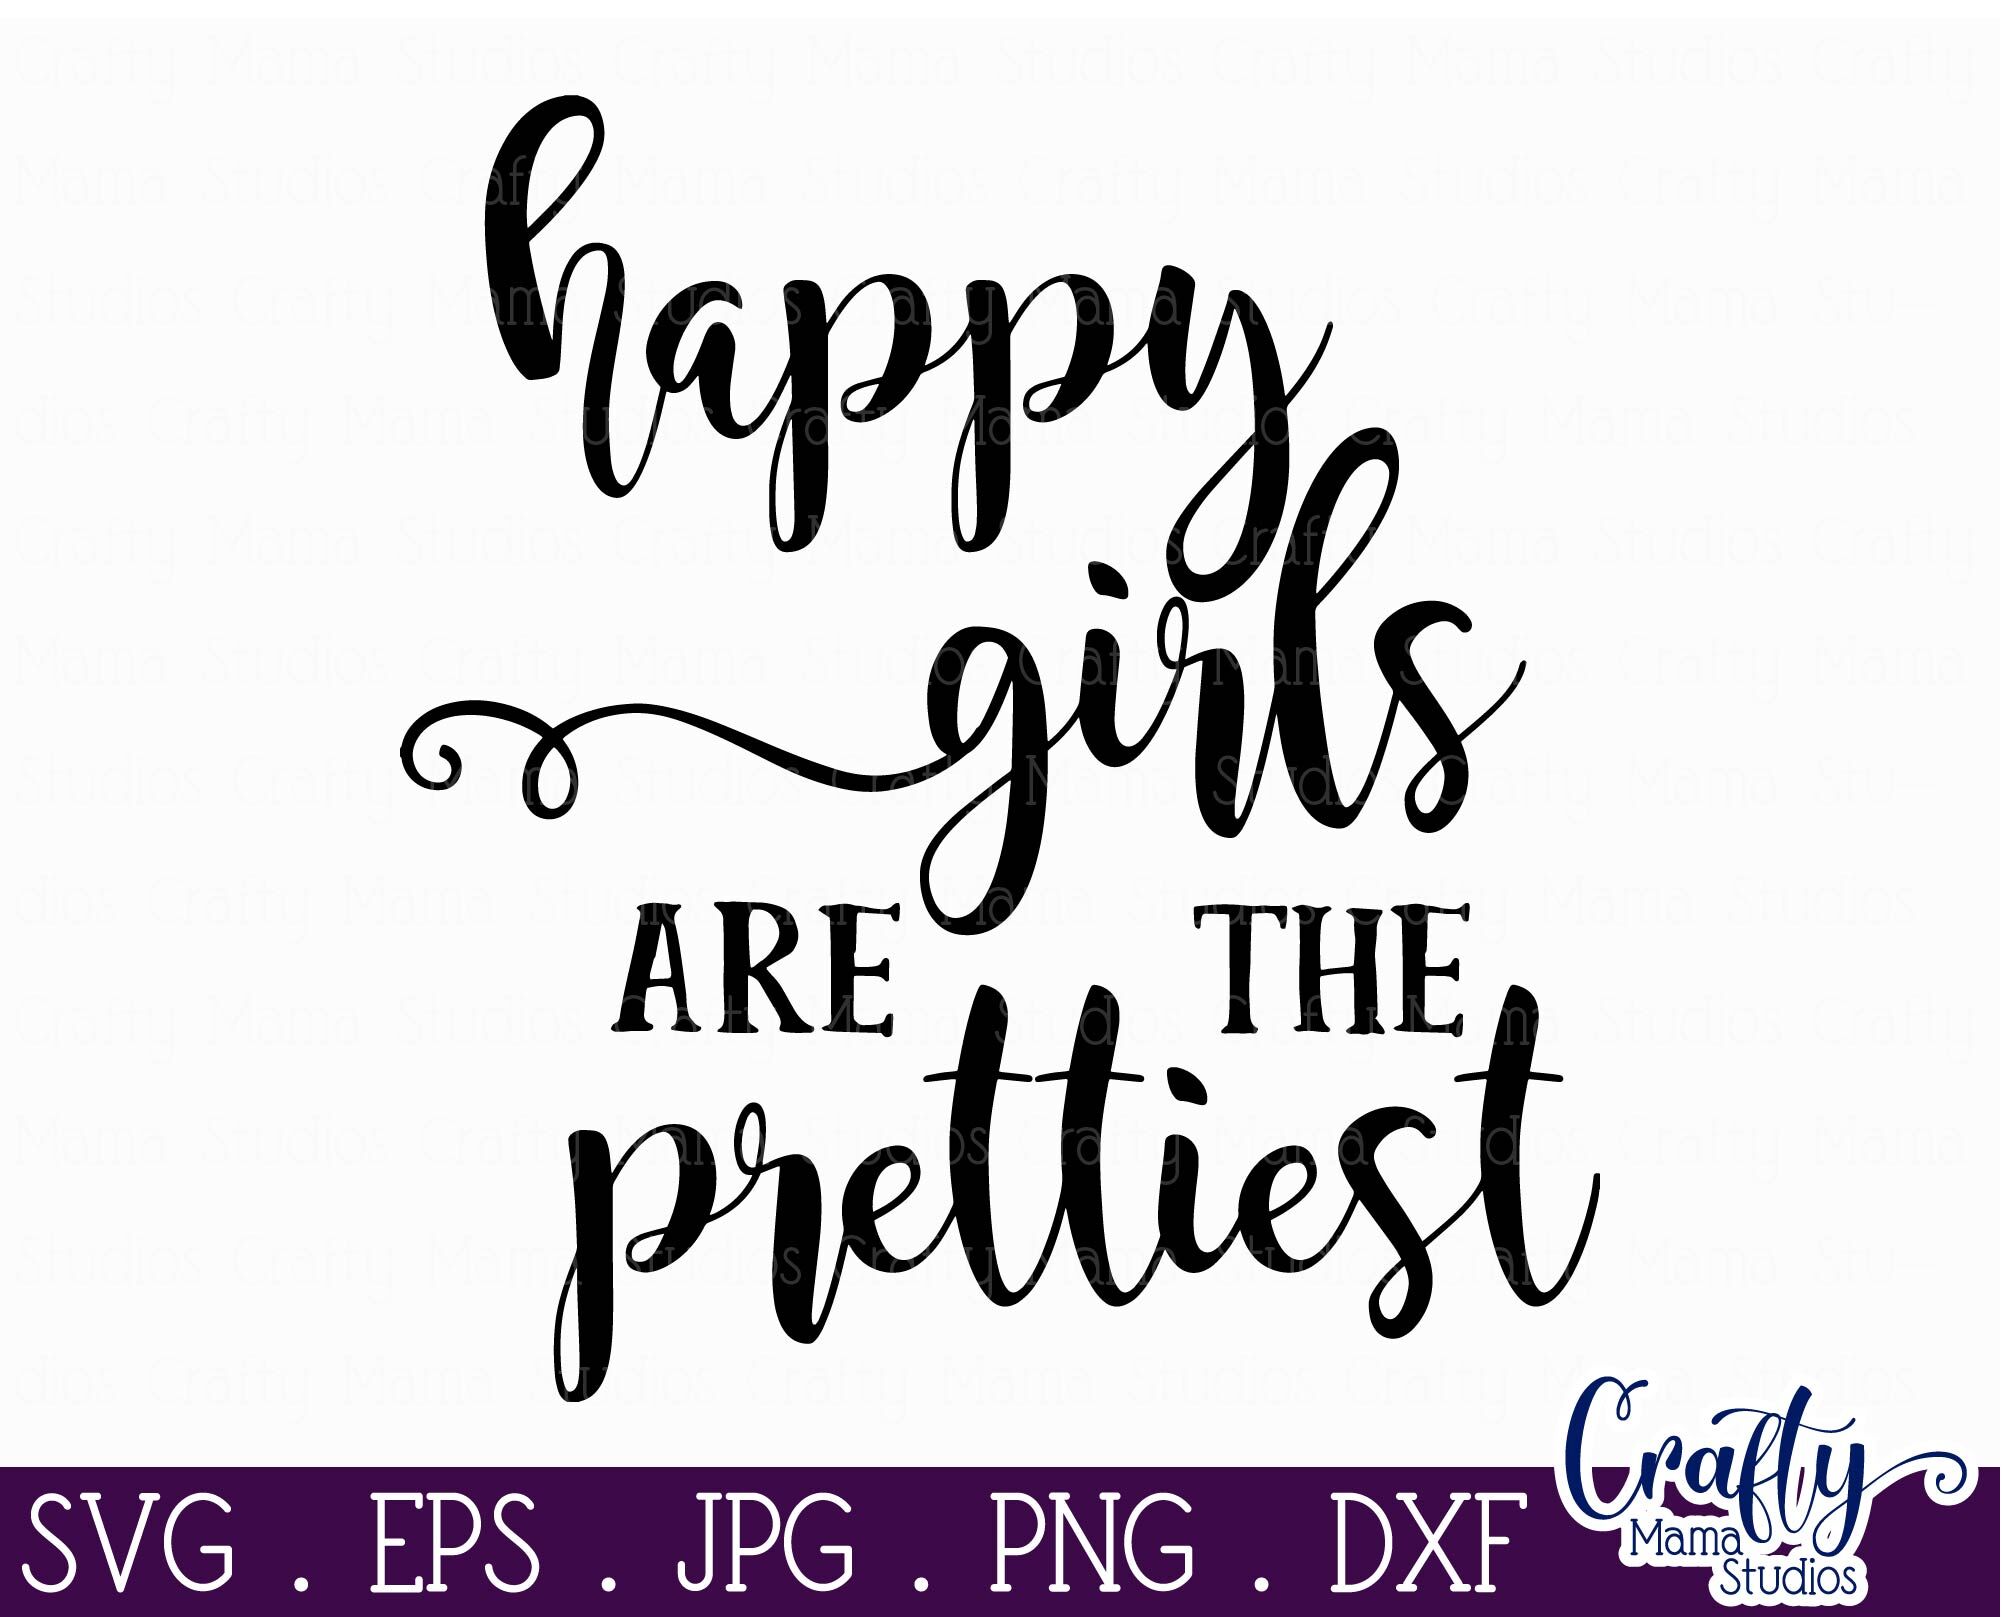 Download Clip Art Beautiful Girl Svg Gifts Svg Svg Files For Cricut For Her Svg Ps I Hope You Feel Beautiful Today Svg Beautiful Svg Magic Girl Svg Svg Art Collectibles